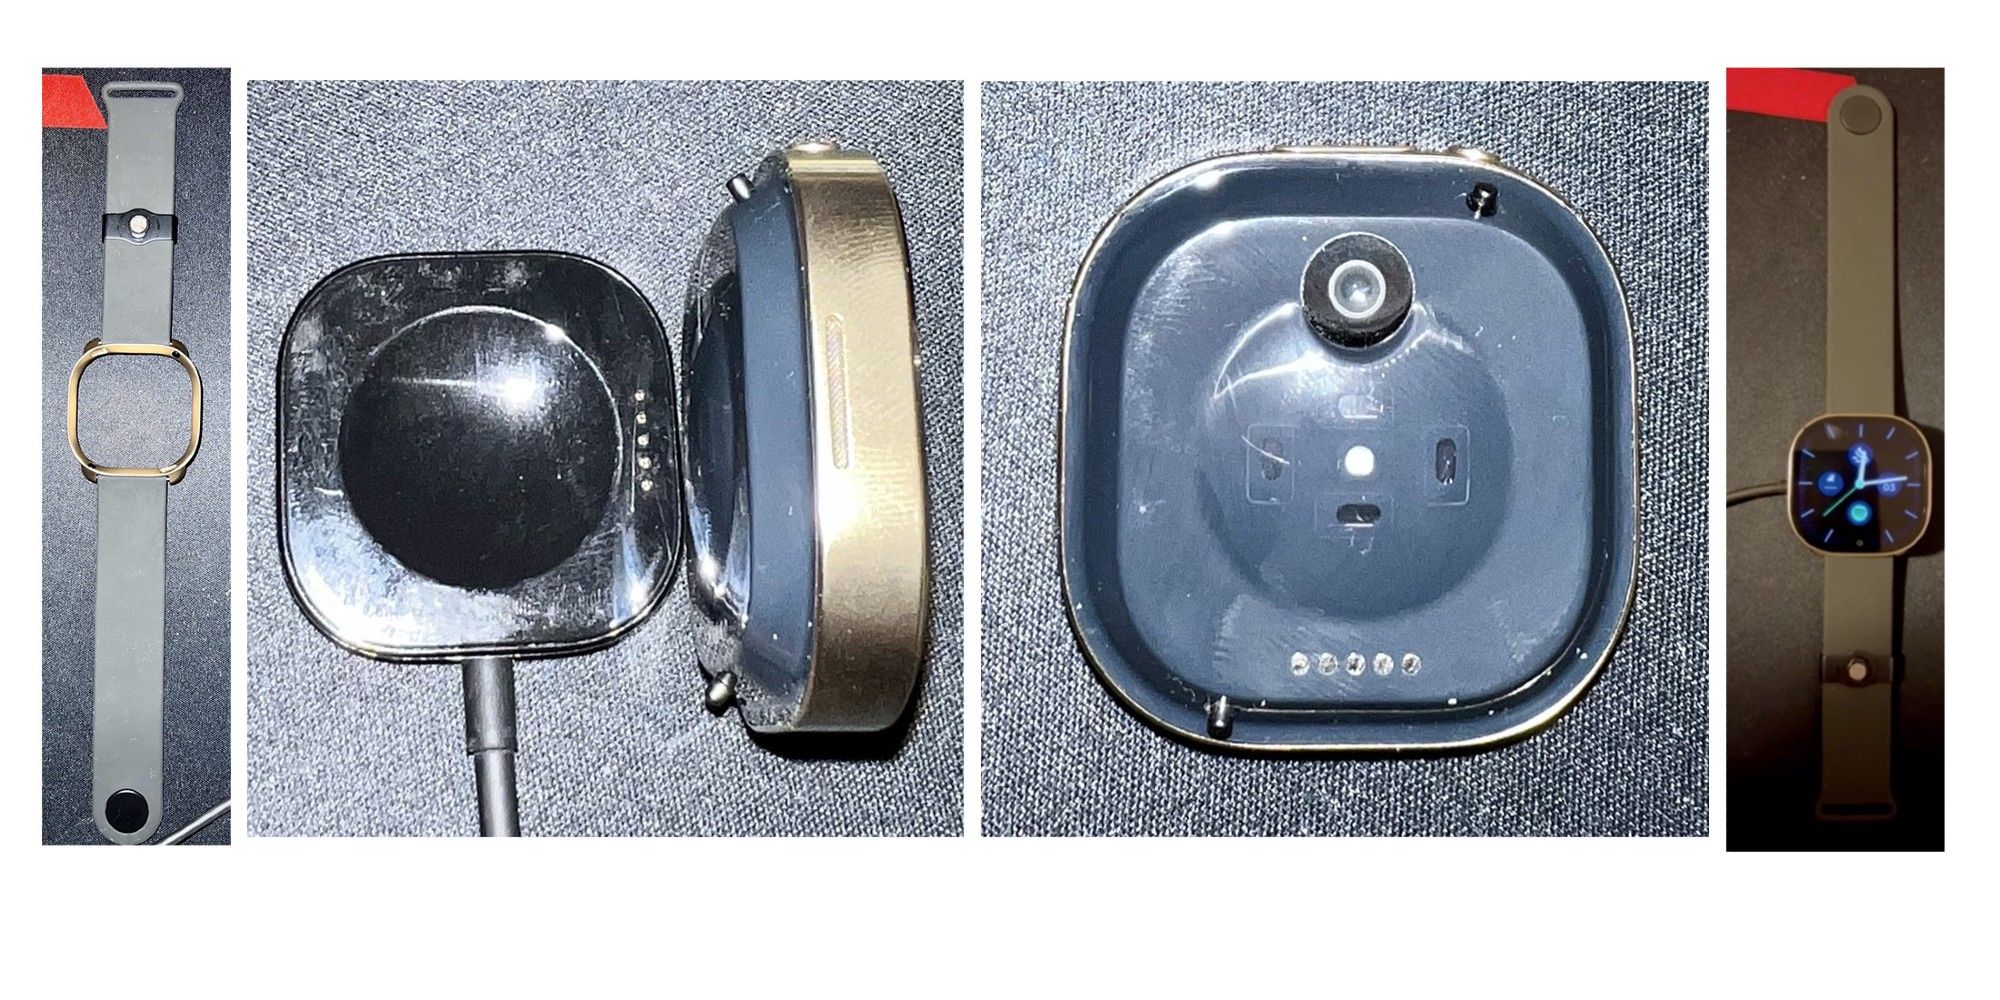 Meta Just Killed Its Dual-Camera Smartwatch: Here’s What It Looks Like